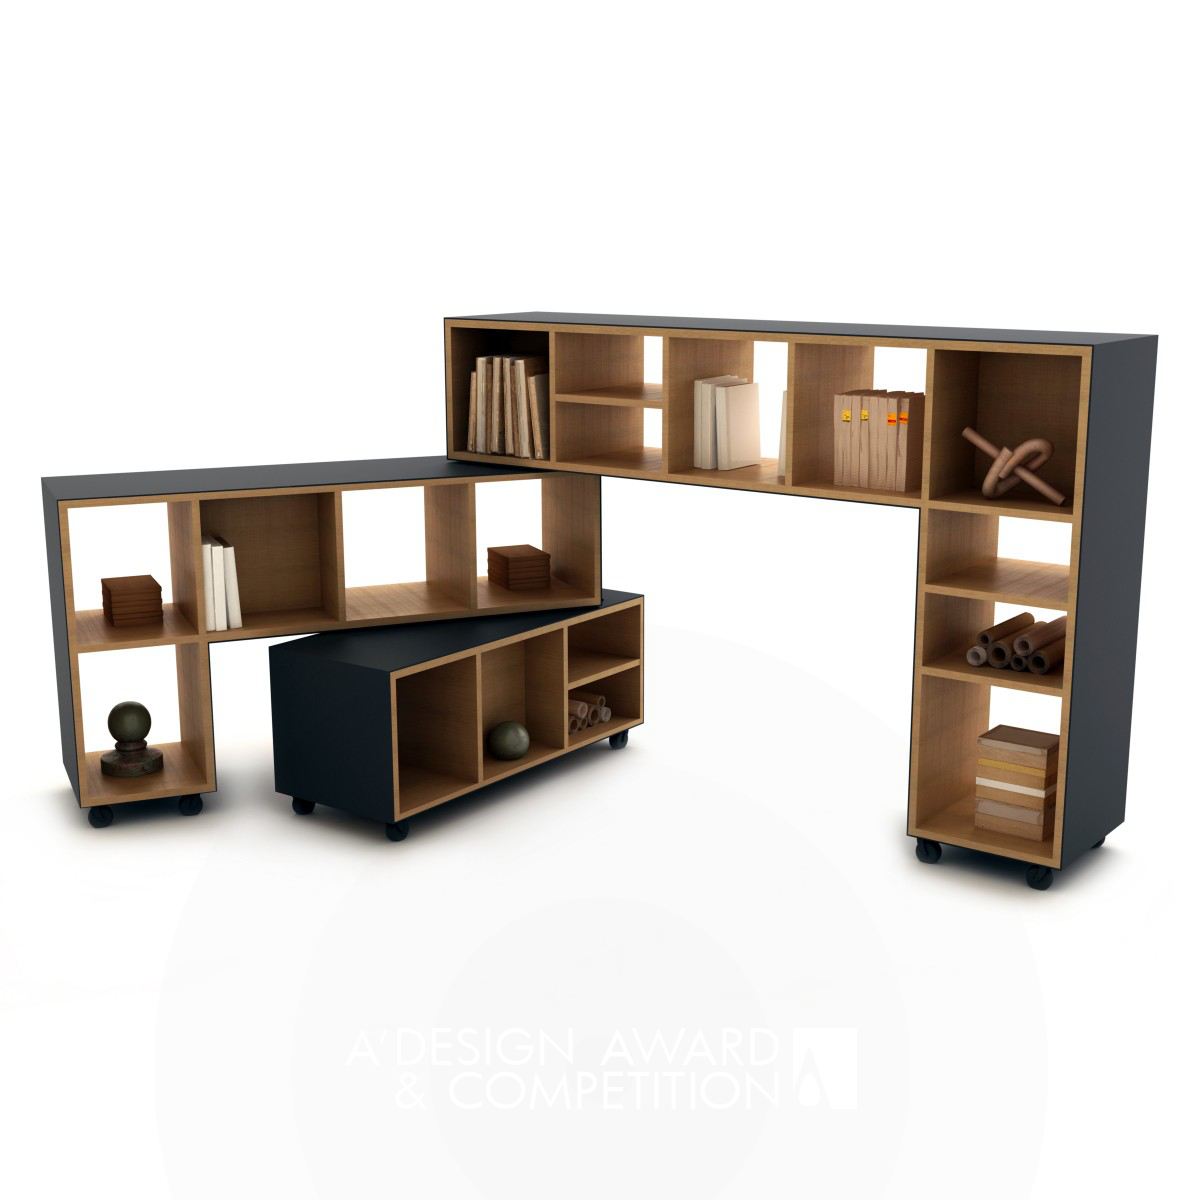 Fit In Partition and Shelving System by Dogan Can Hatunoglu